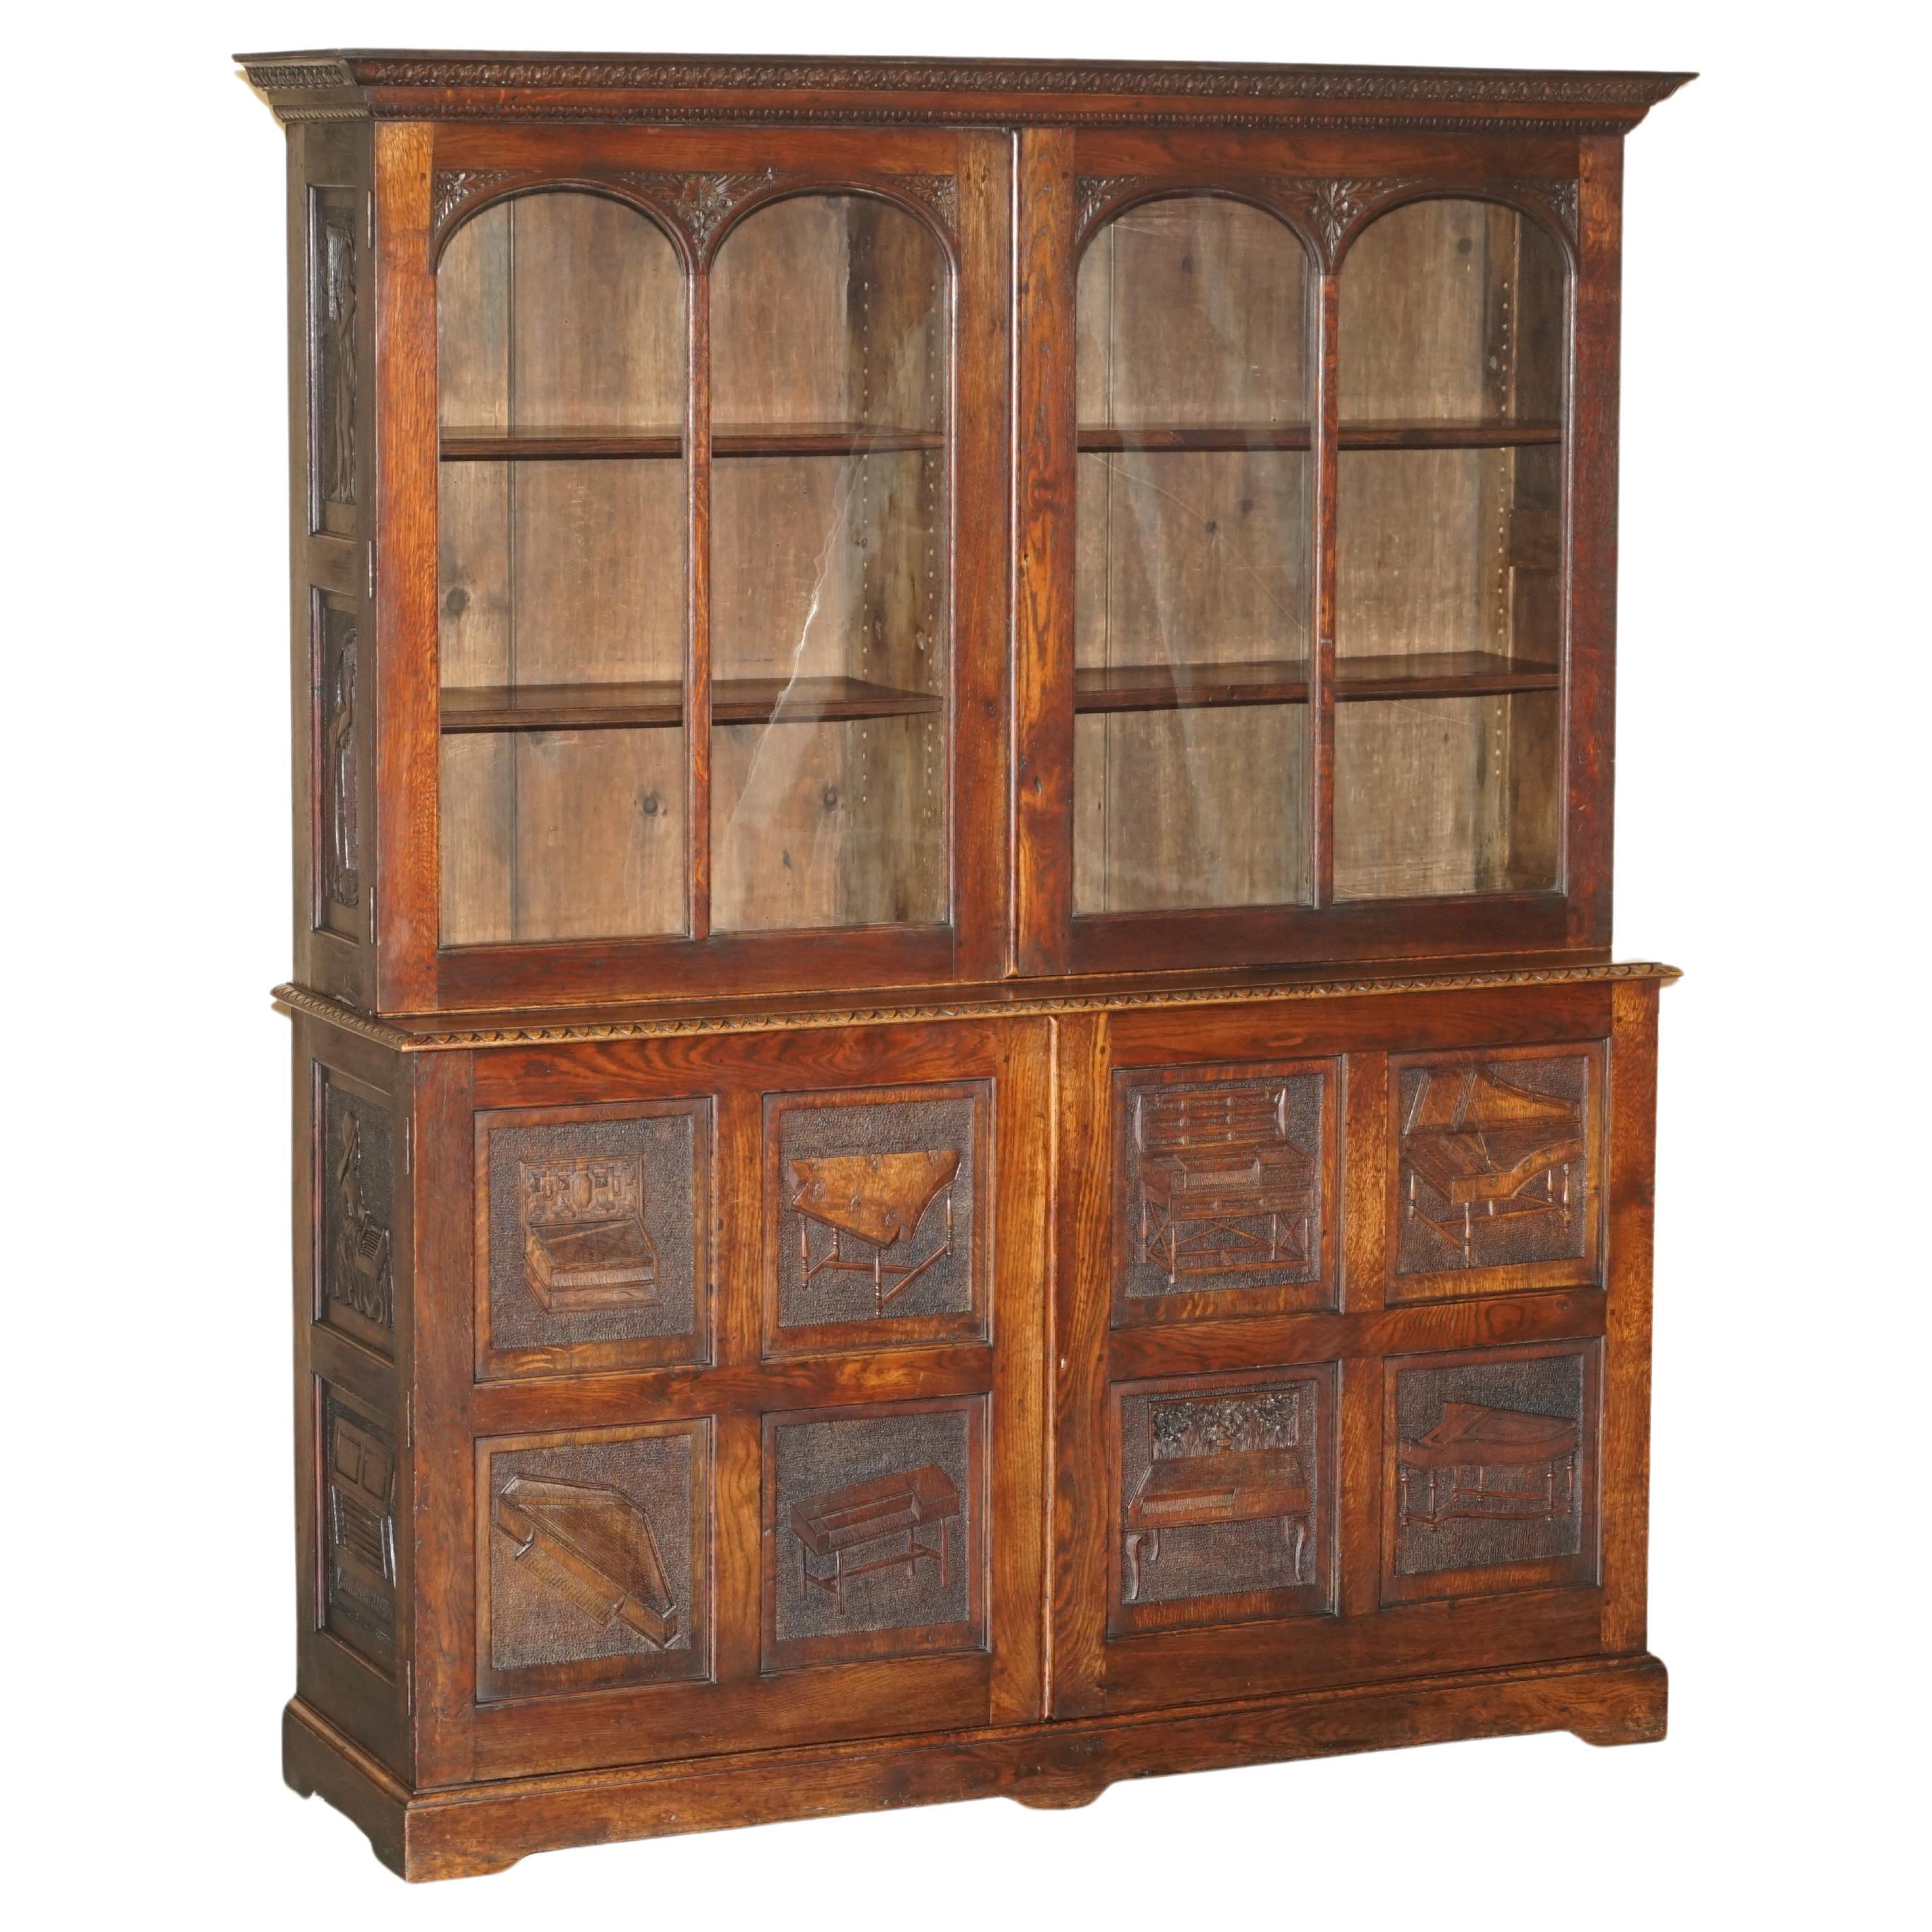 IMPORTANT CARVED BOOKCASE CABiNET FROM THE BATE COLLECTION IN OXFORD UNIVERSITY For Sale